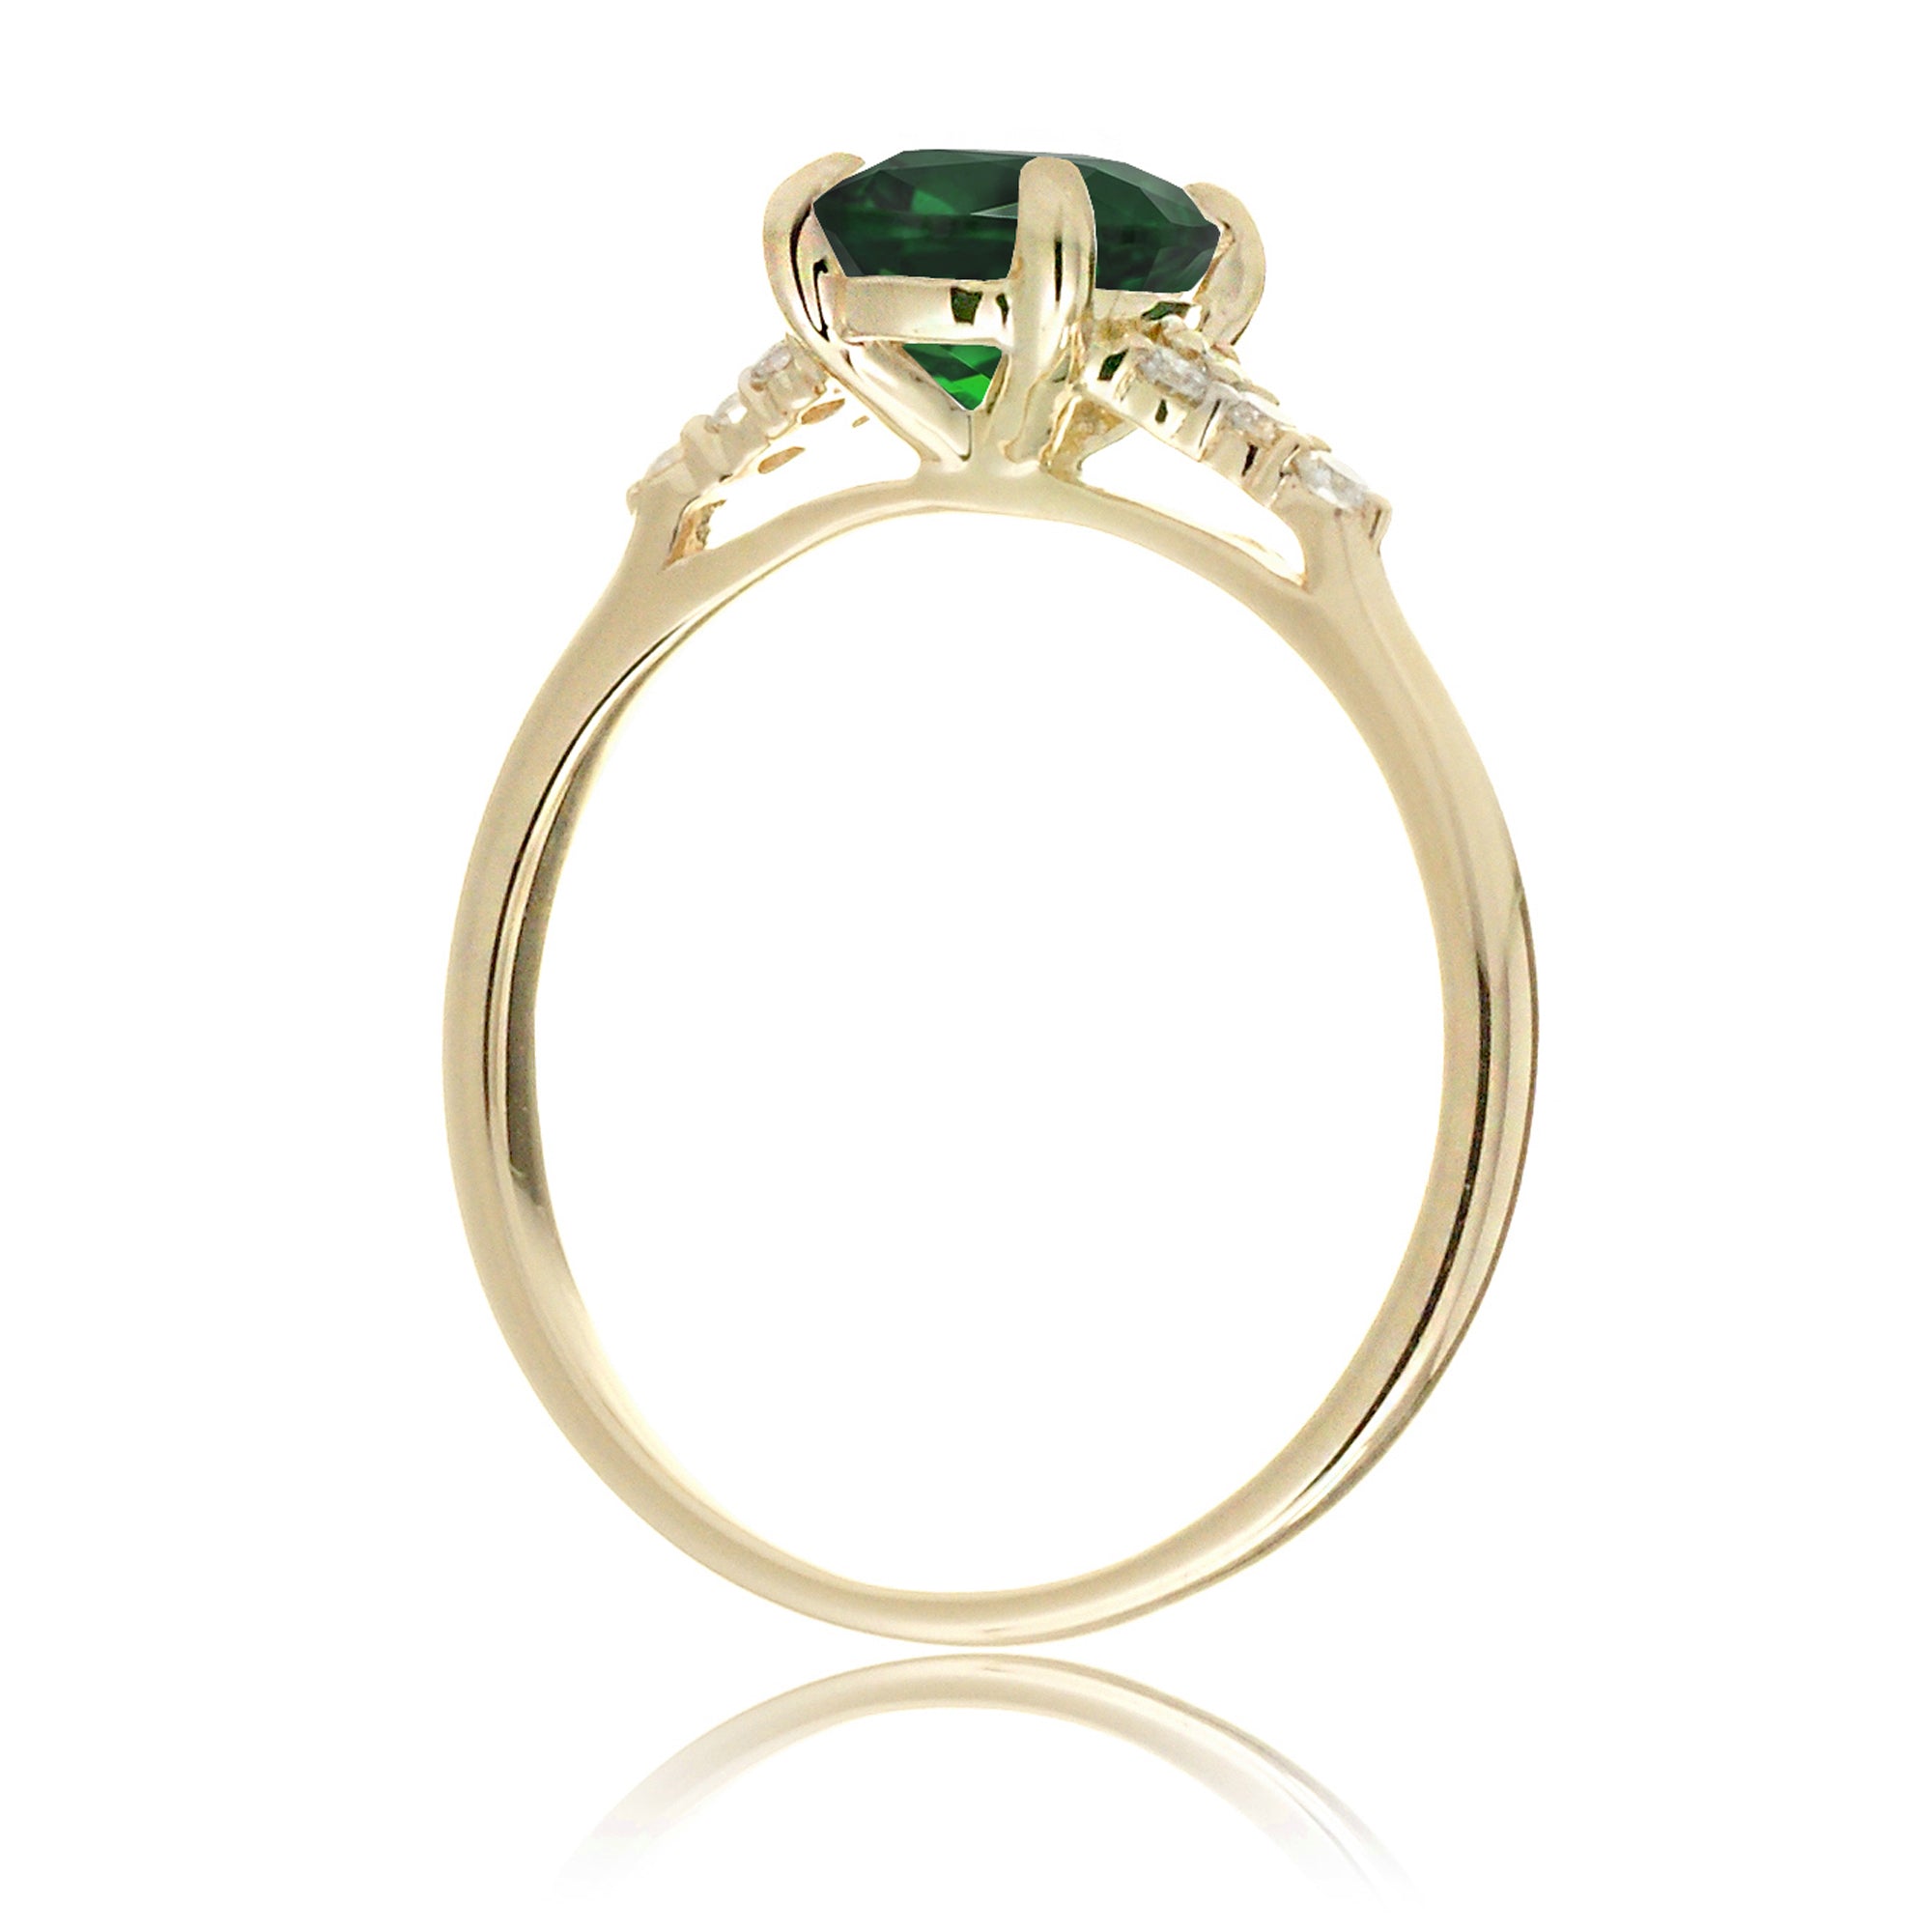 Emerald engagement ring with princess cut and diamond accent in yellow gold